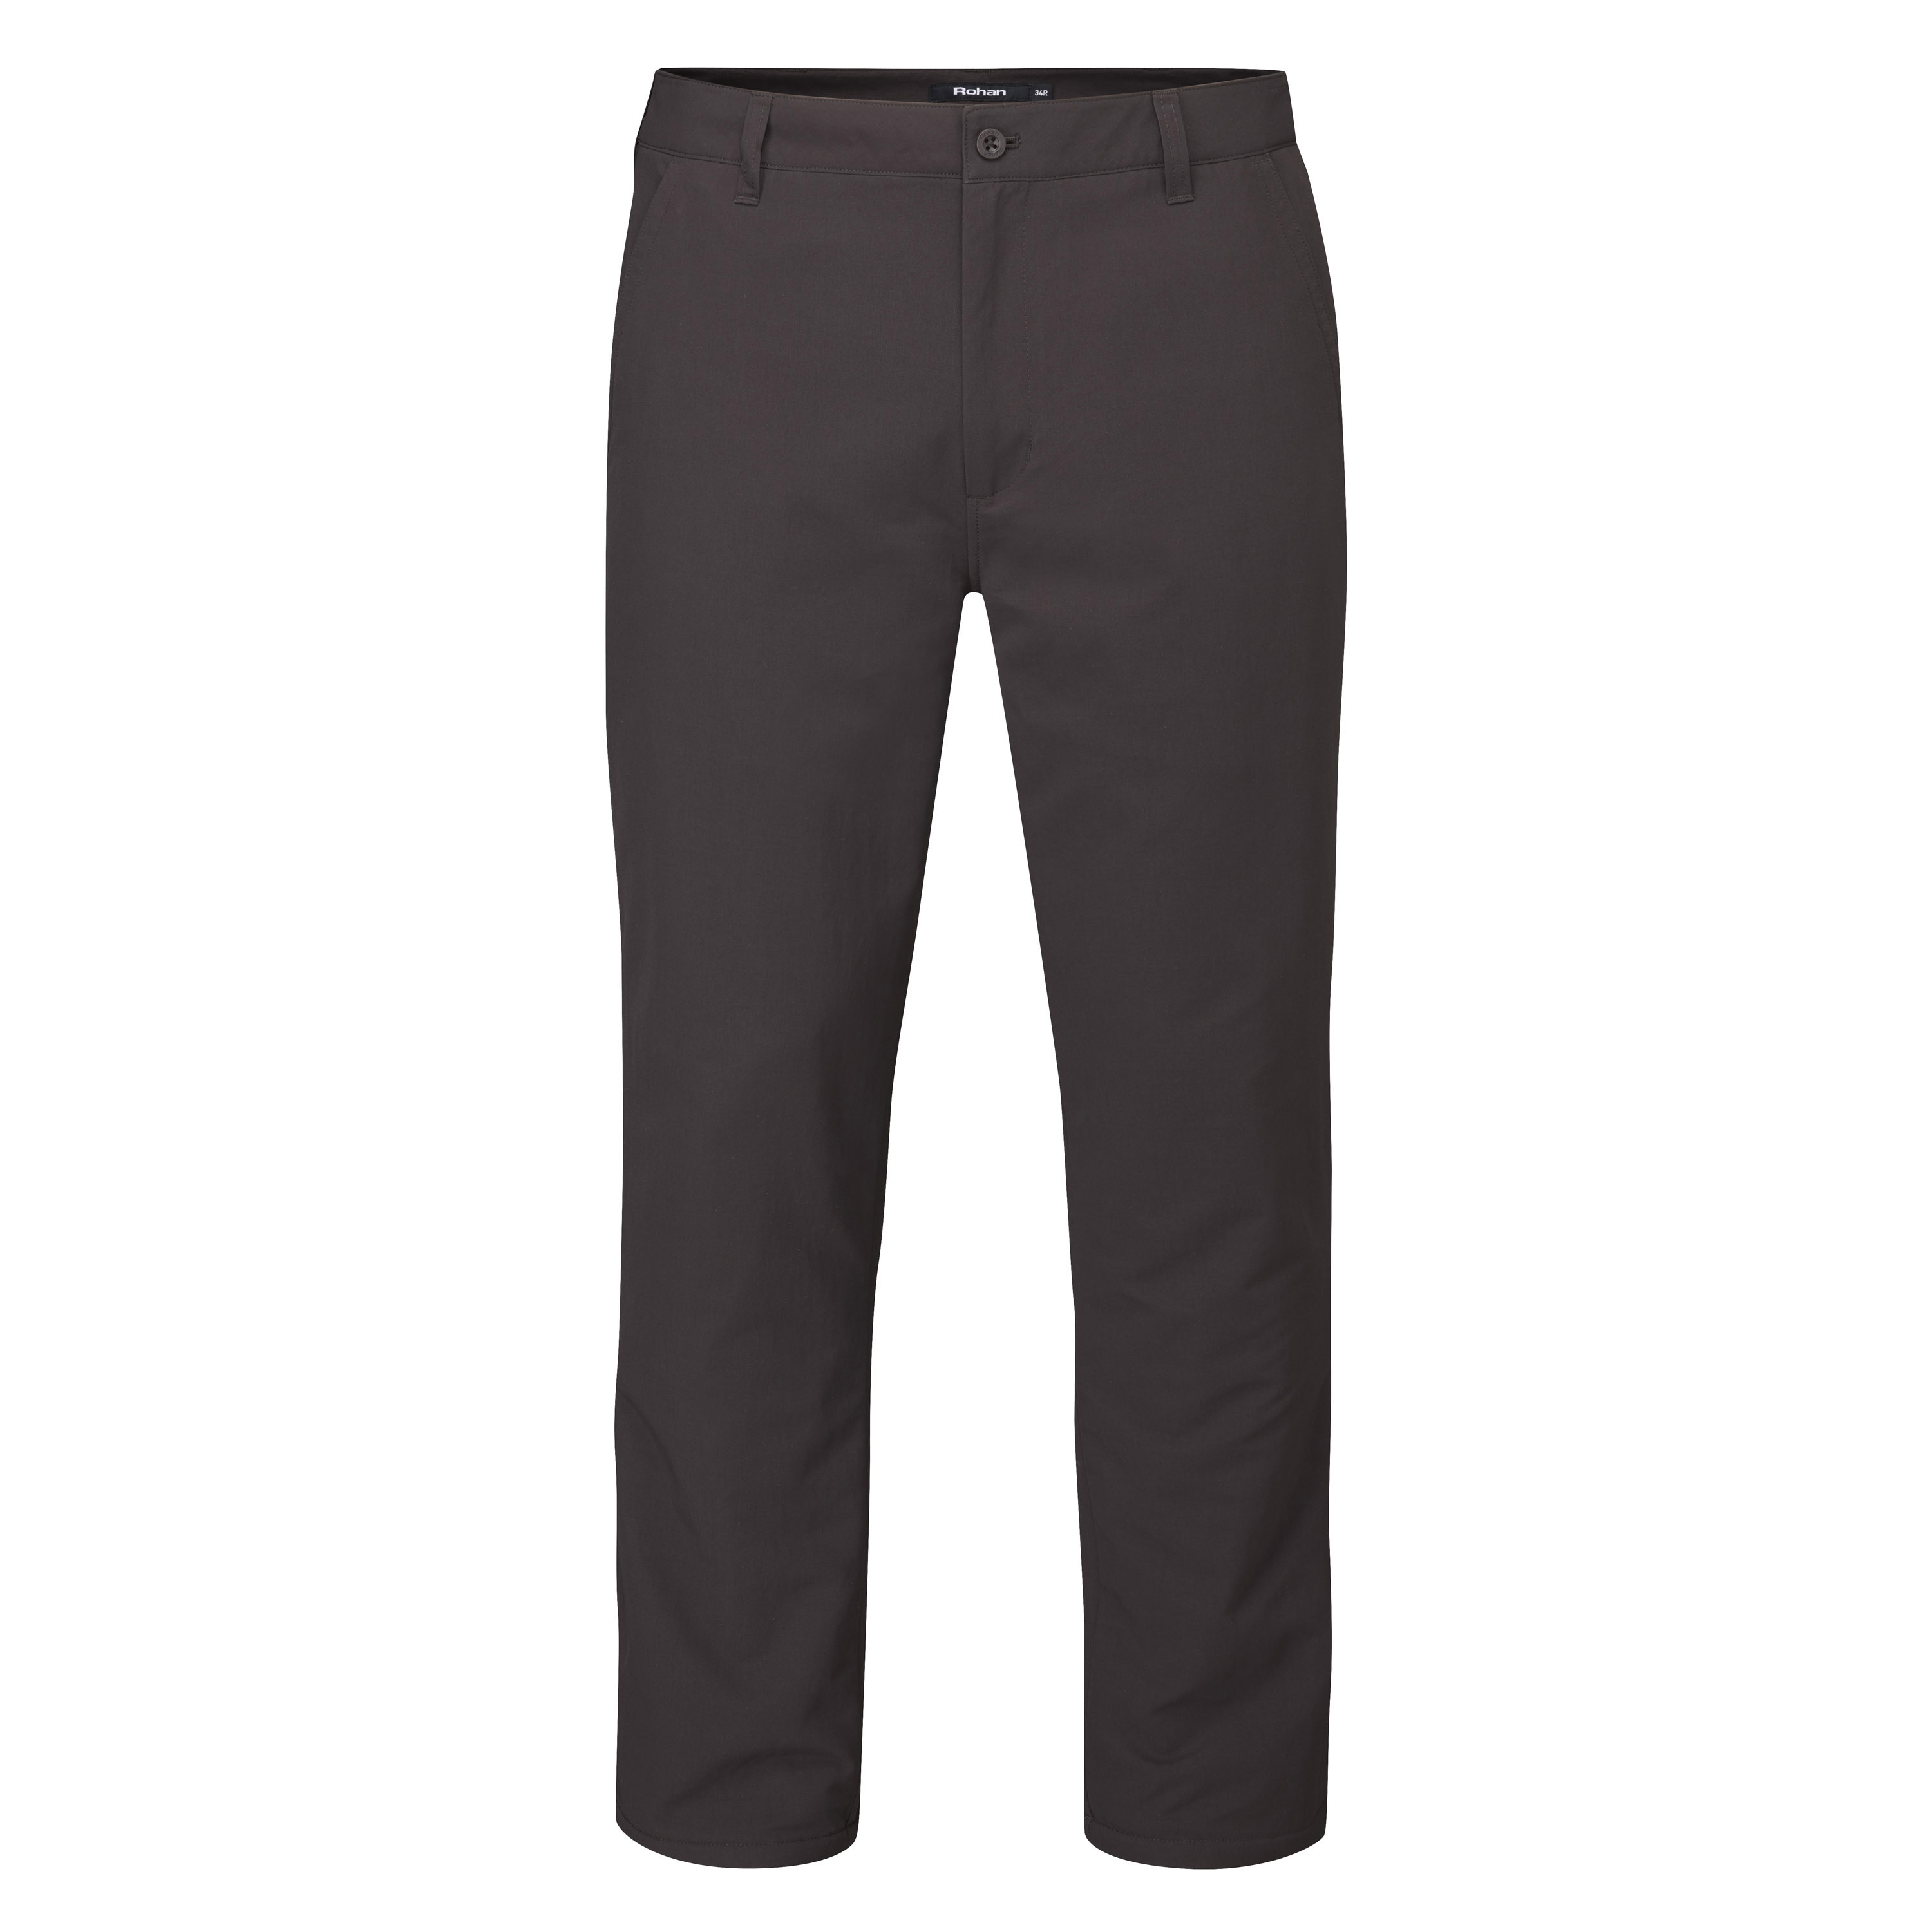 Rohan Mens Winter Fusion Trousers